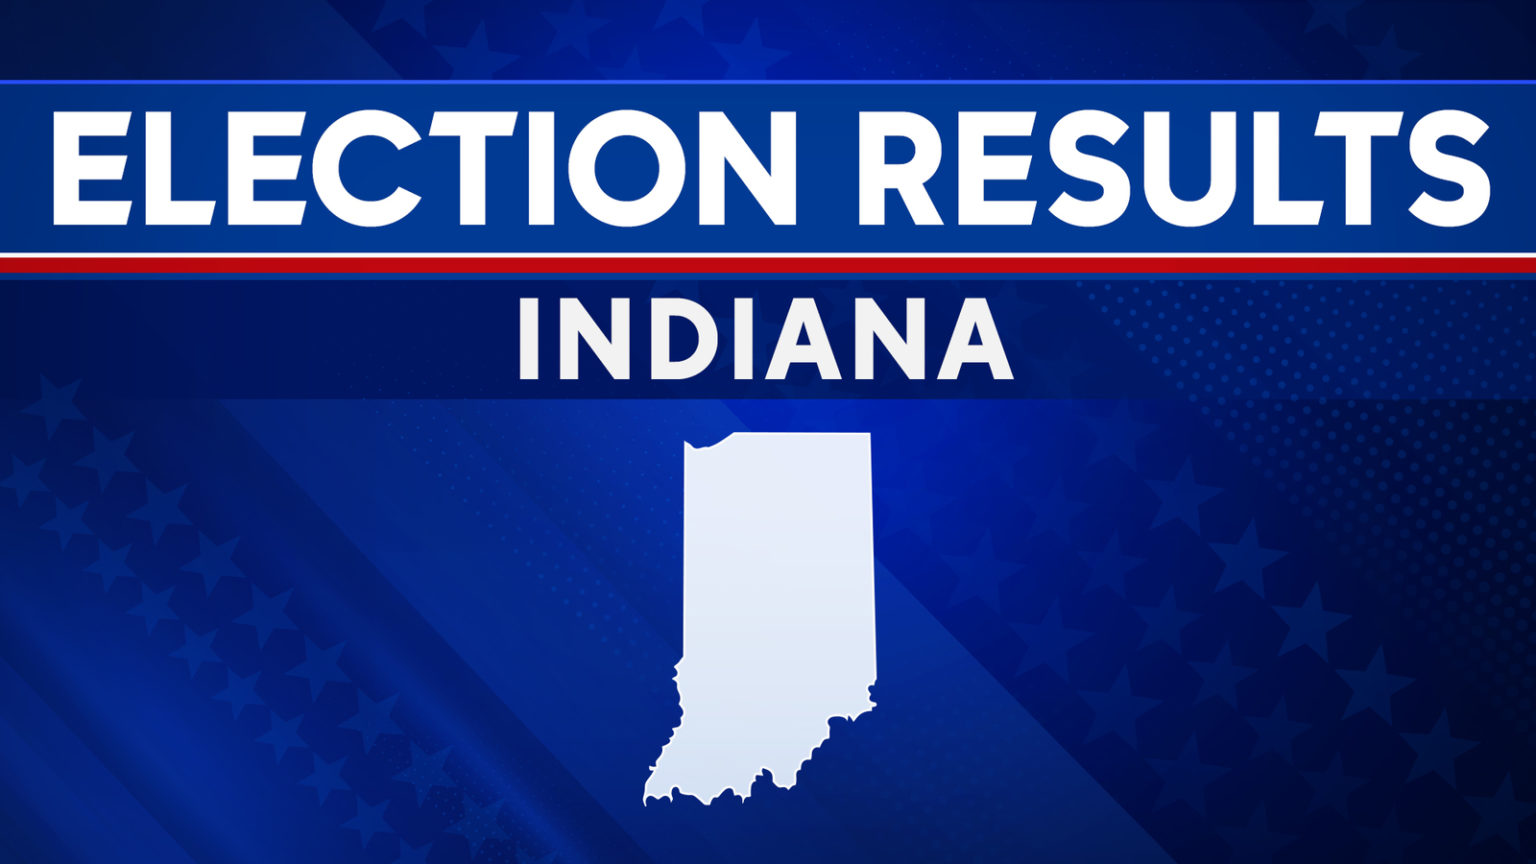 Indiana election results 2020: Electoral college votes, who won - CBNC